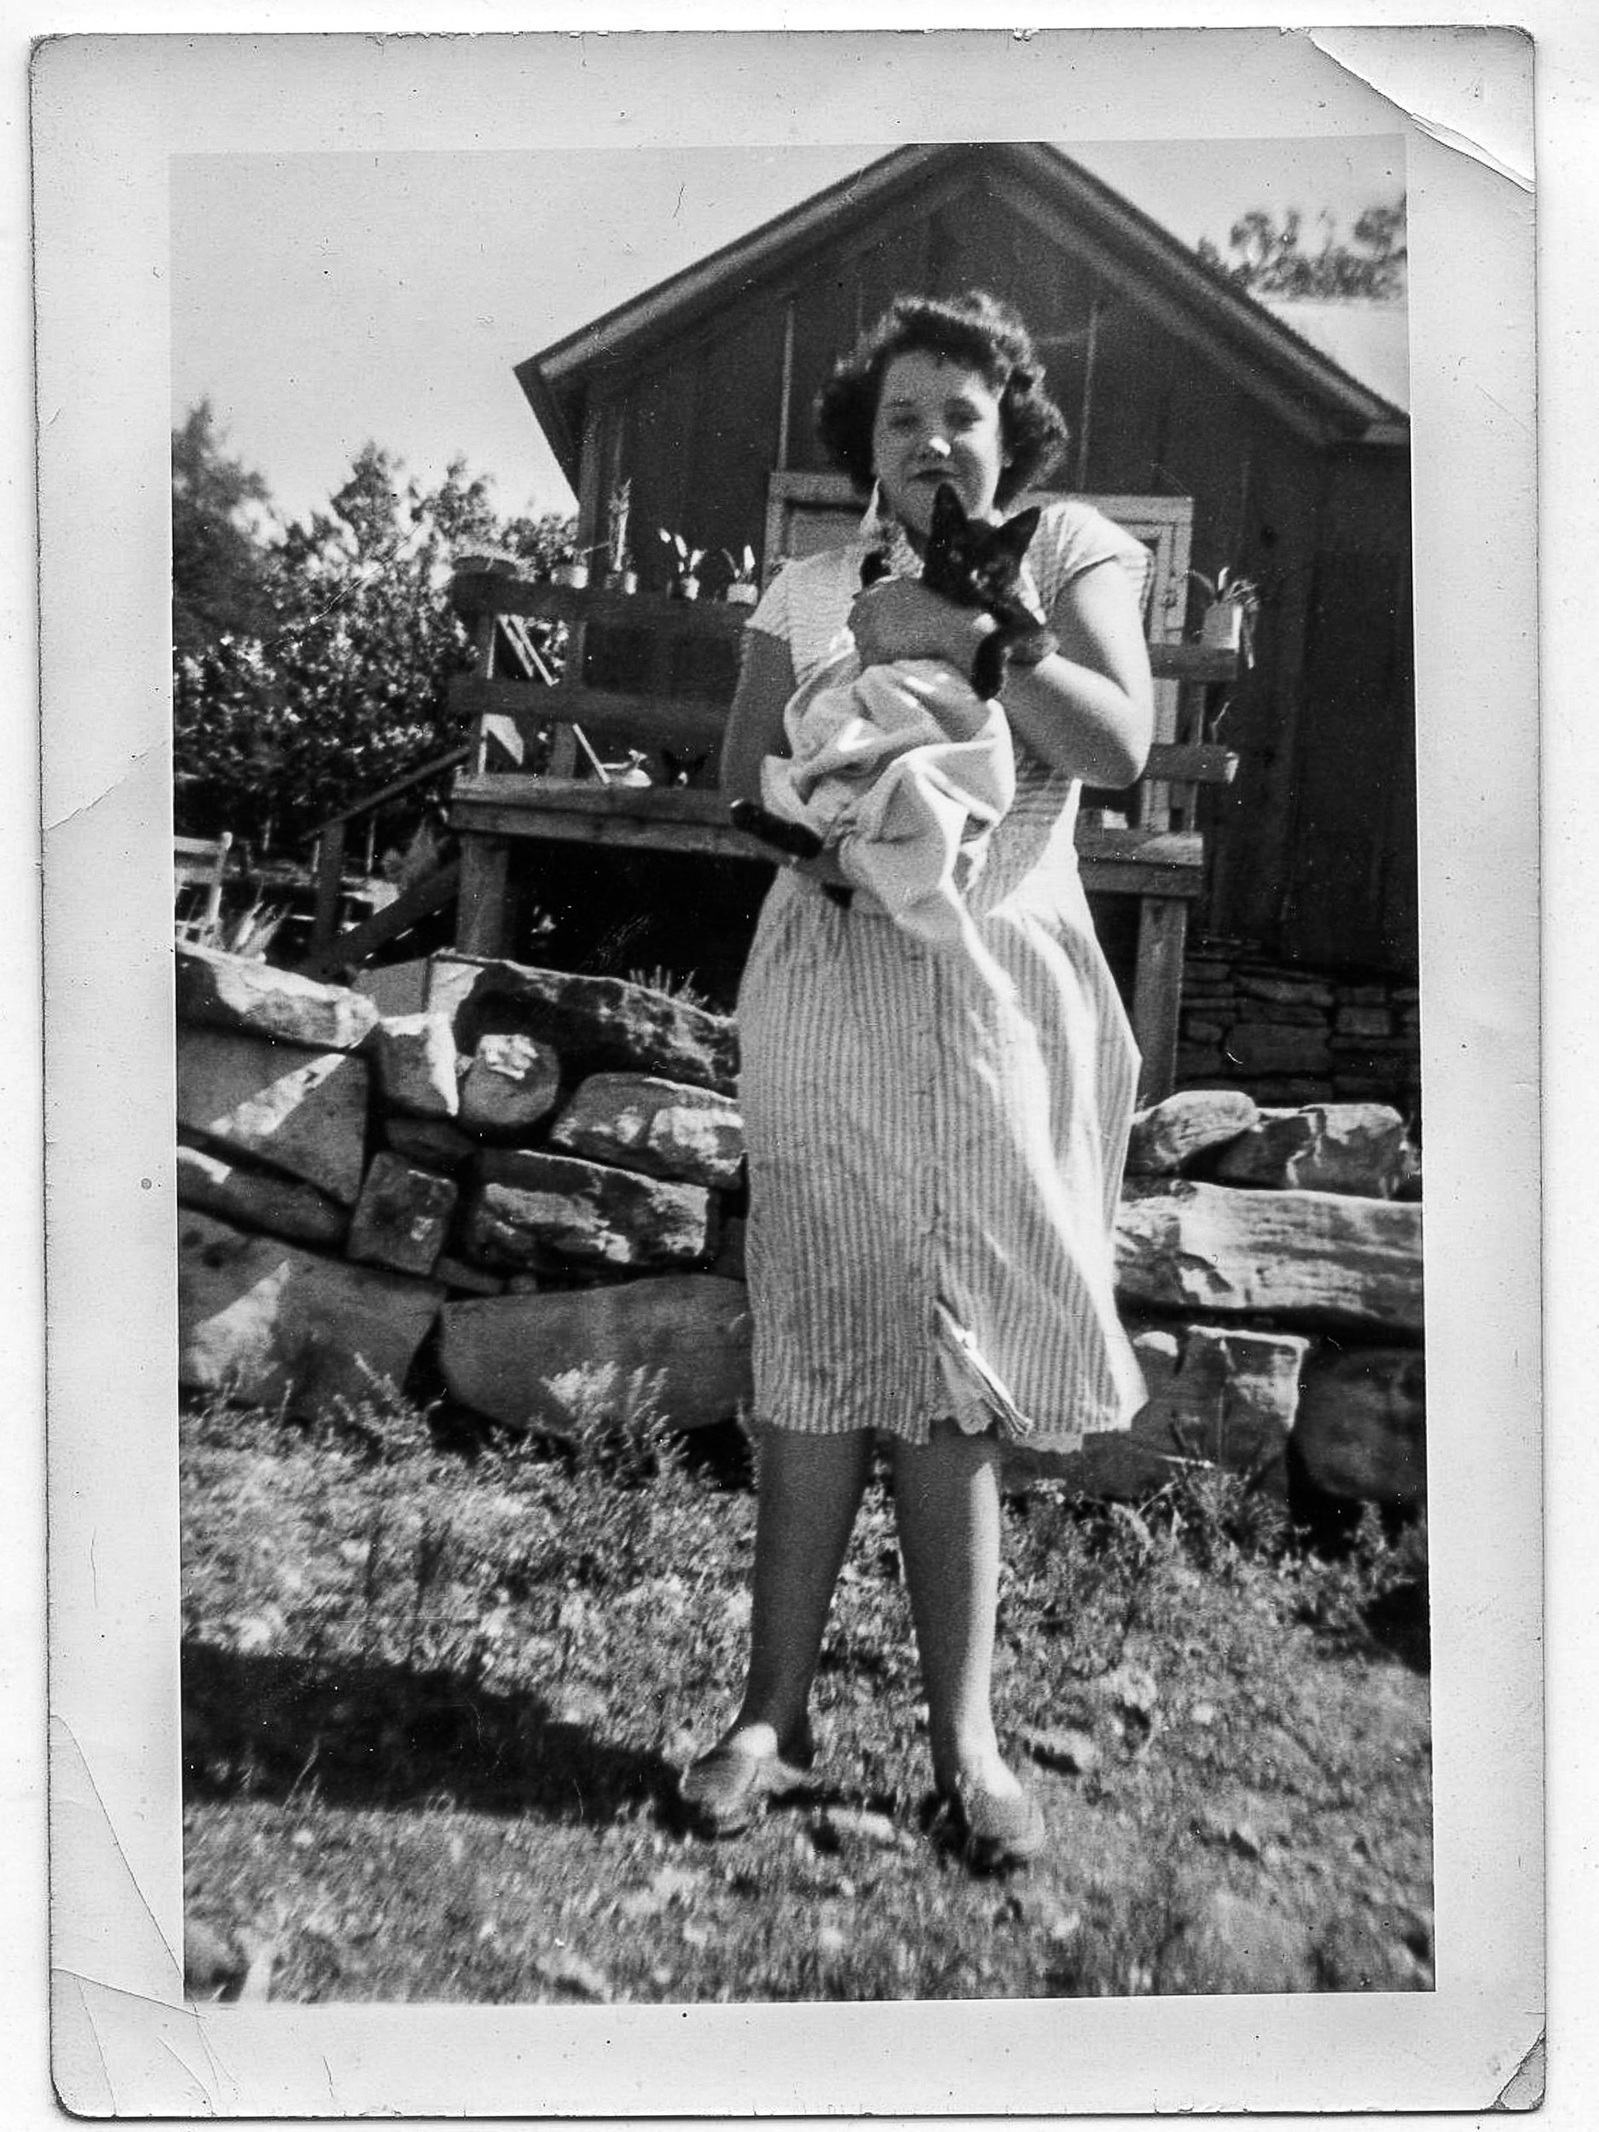 Vintage Black & white photo of young woman in front of shack, holding a black cat.